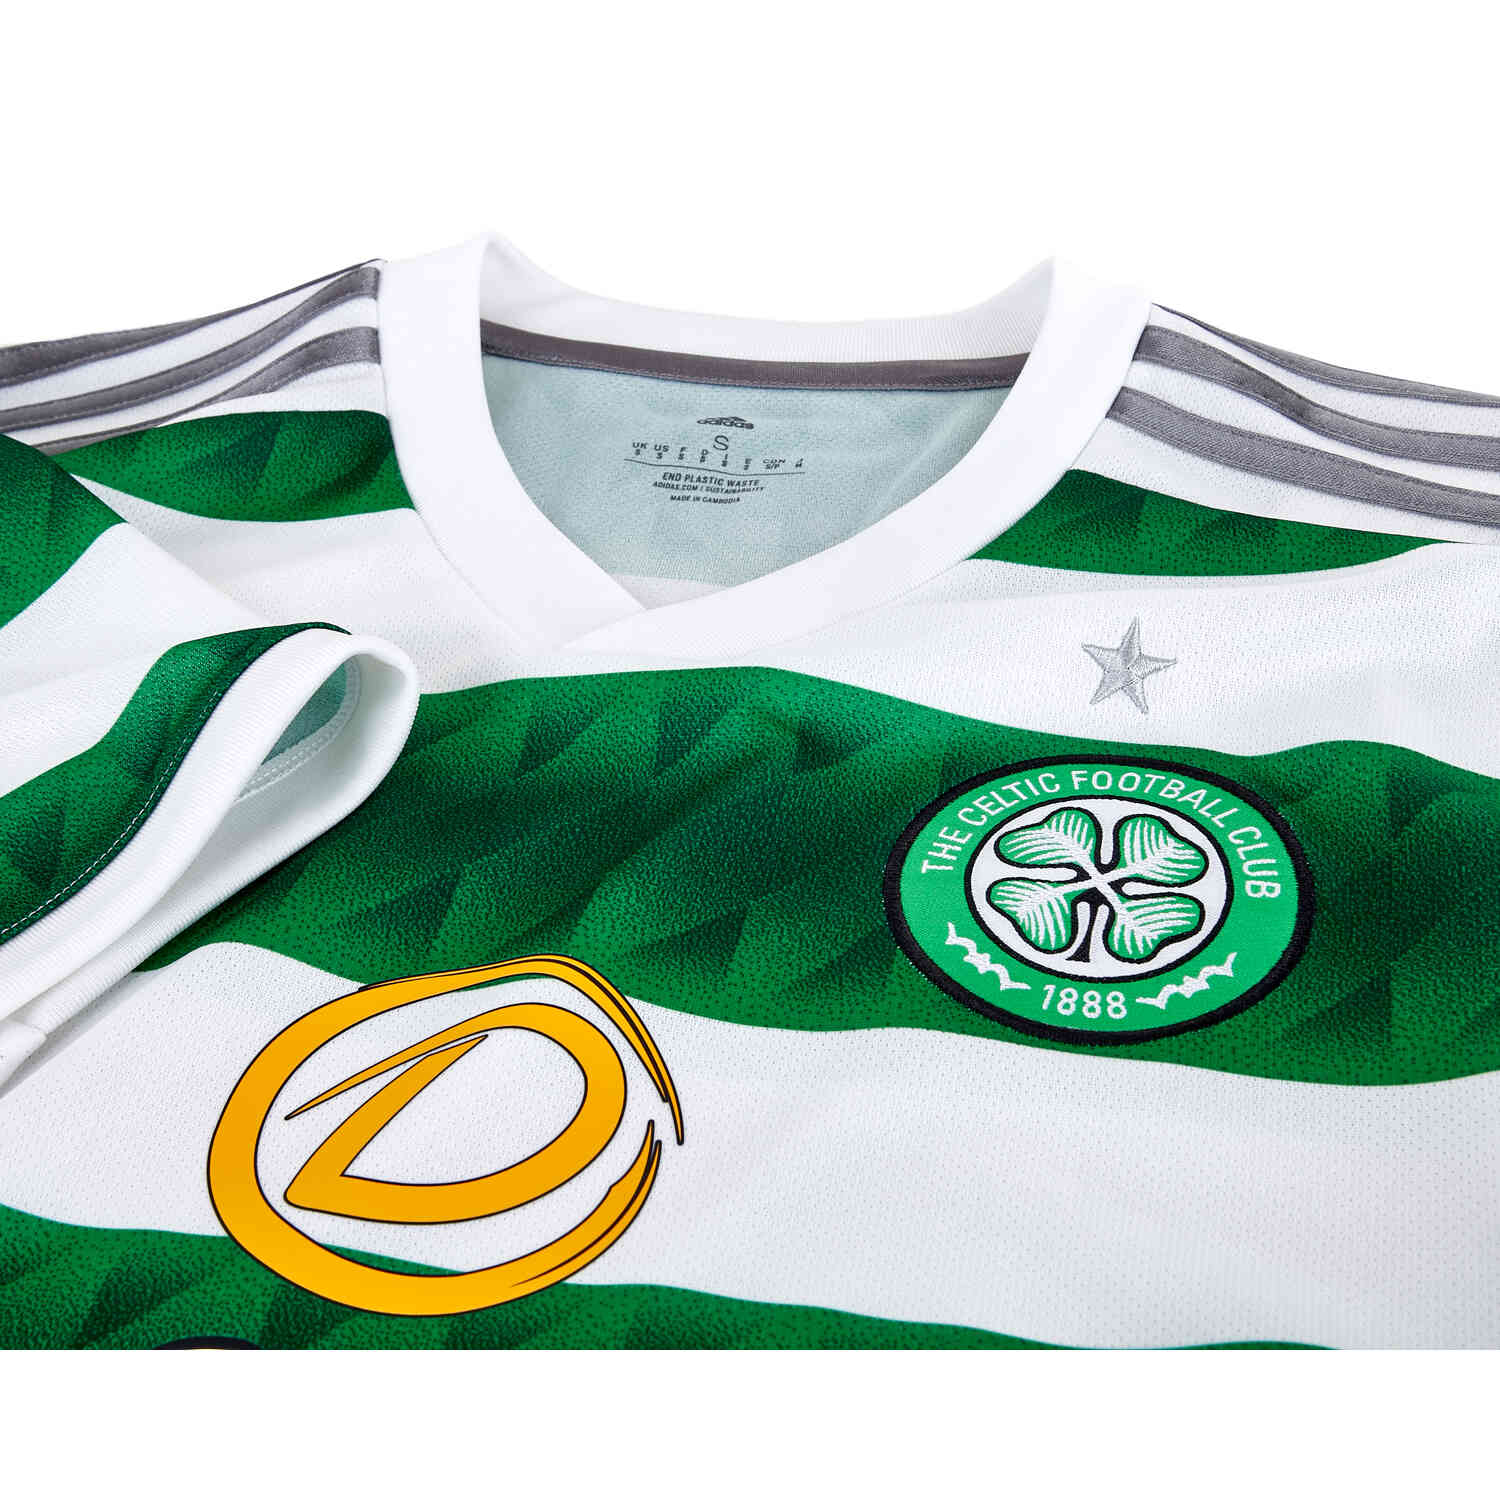 New Adidas plans for Celtic 'leaked' as fresh Hoops shirt upcoming